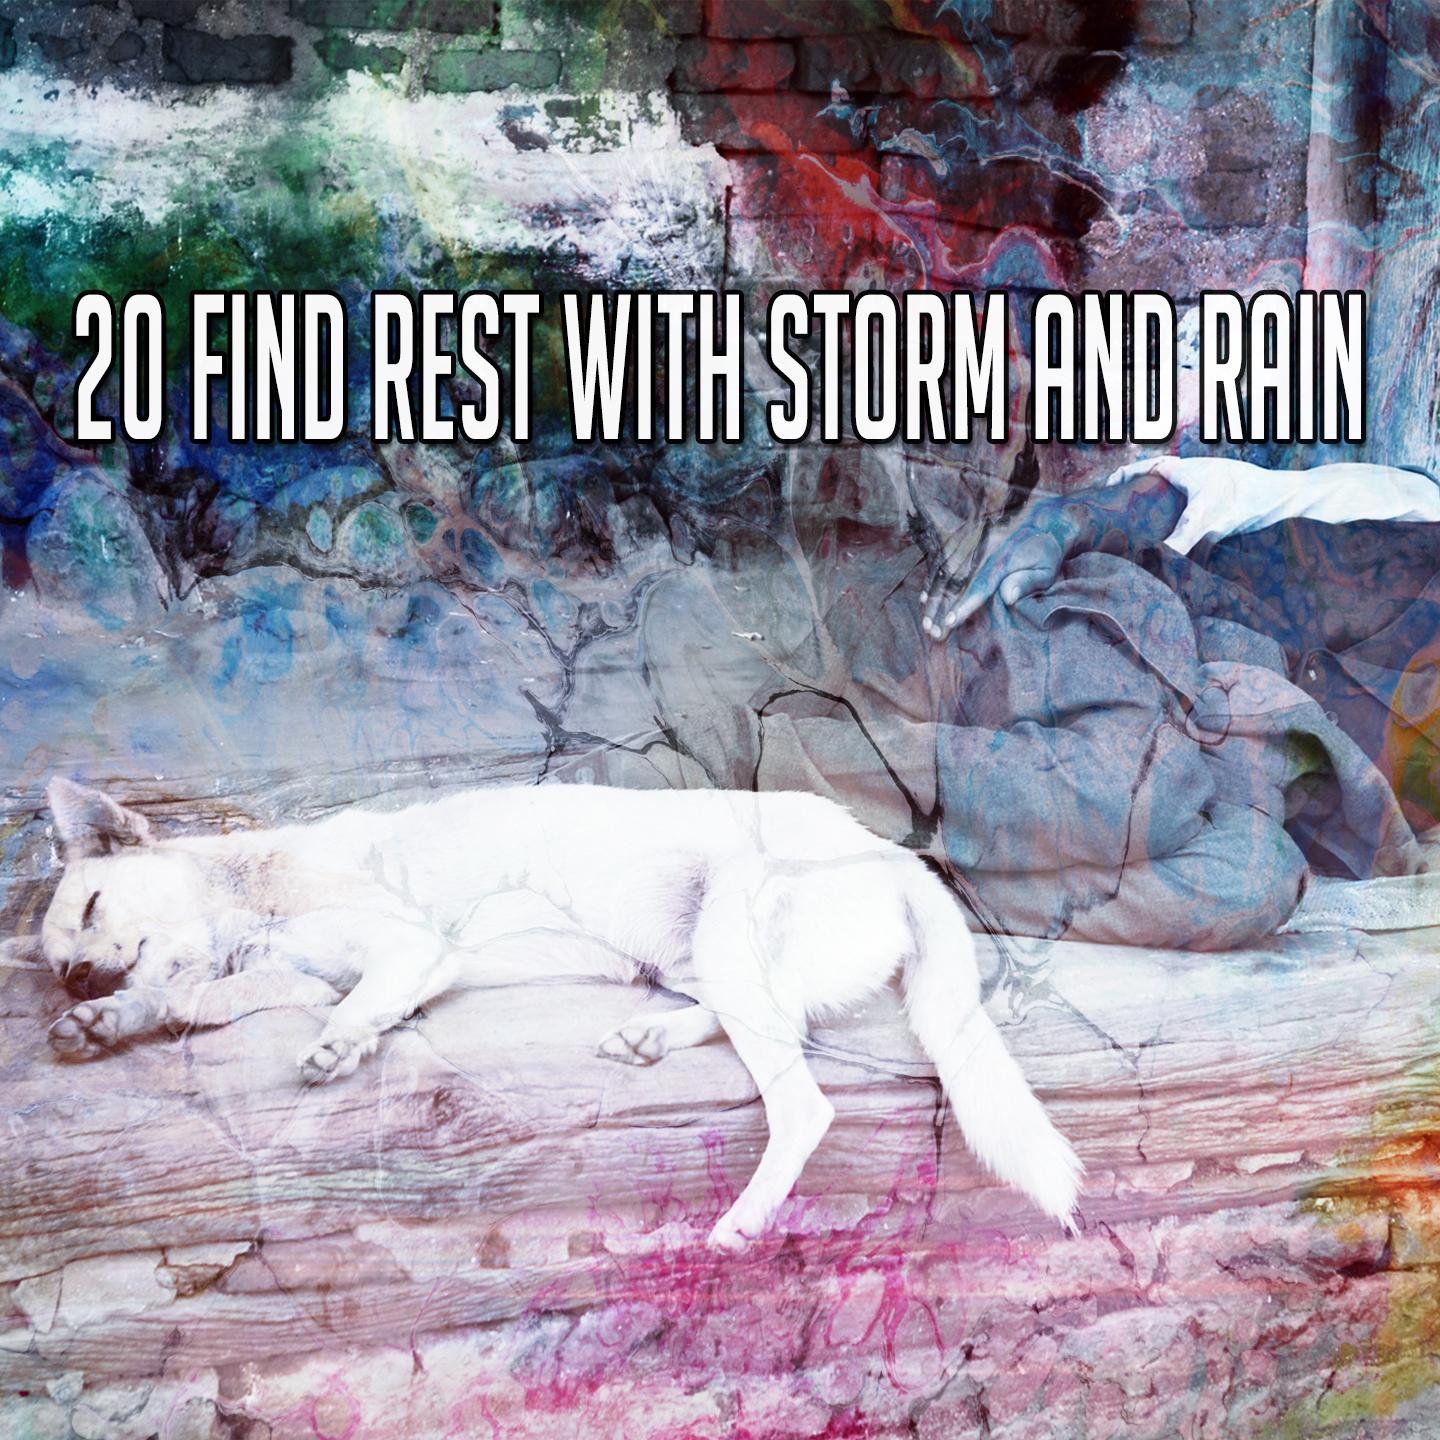 20 Find Rest with Storm and Rain